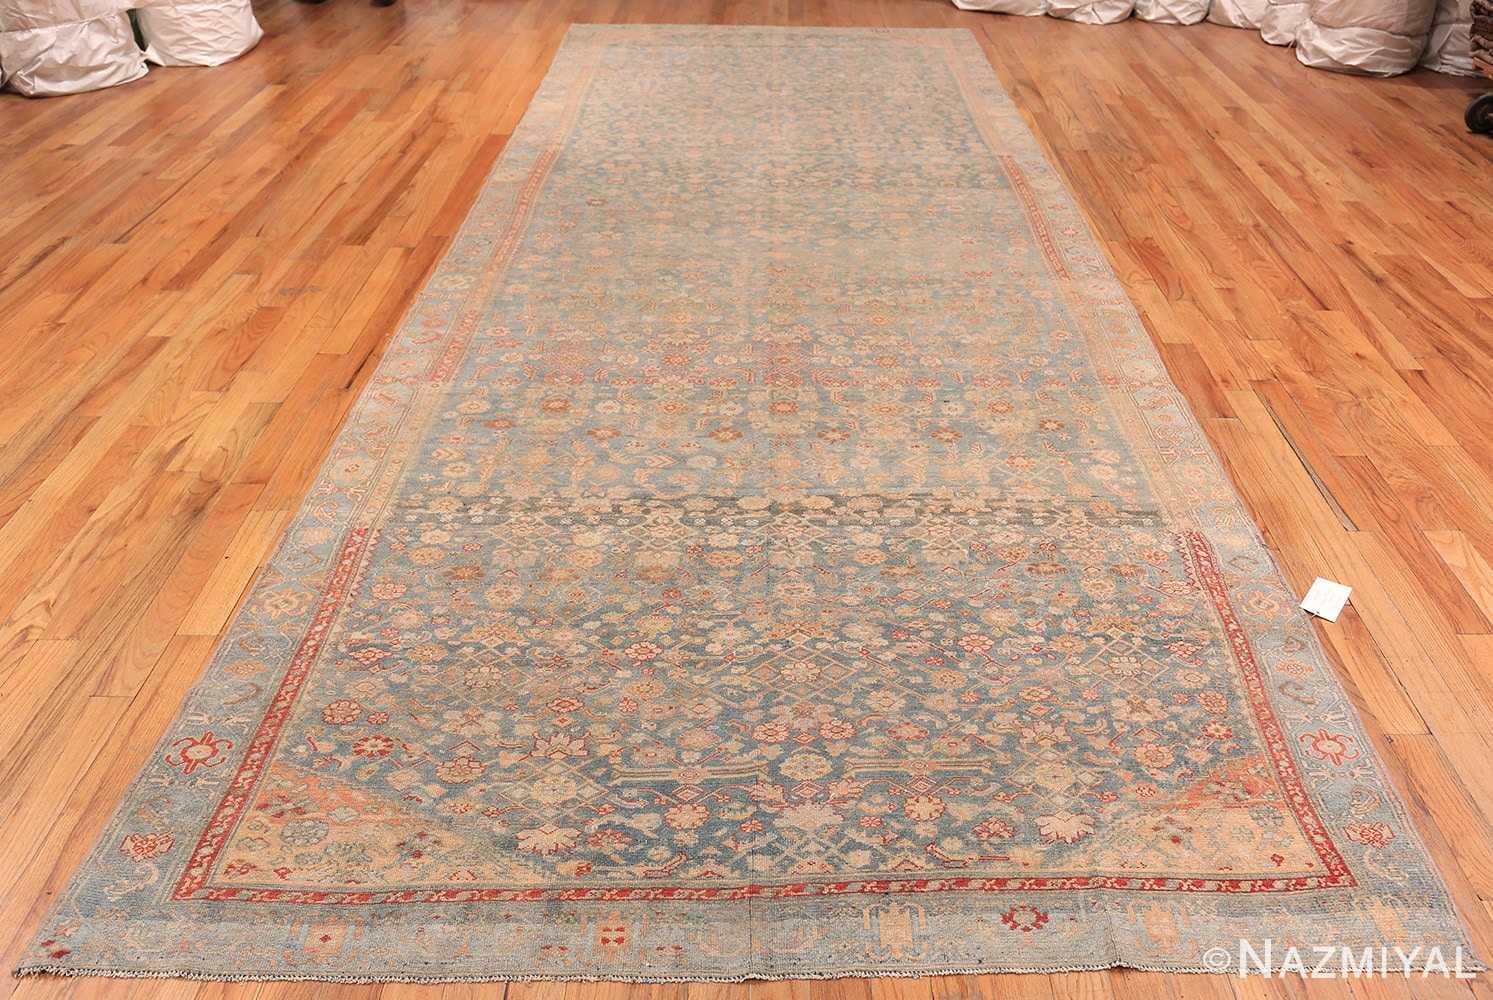 Whole View Of Light Blue Antique Persian Malayer Rug 70434 by Nazmiyal NYC